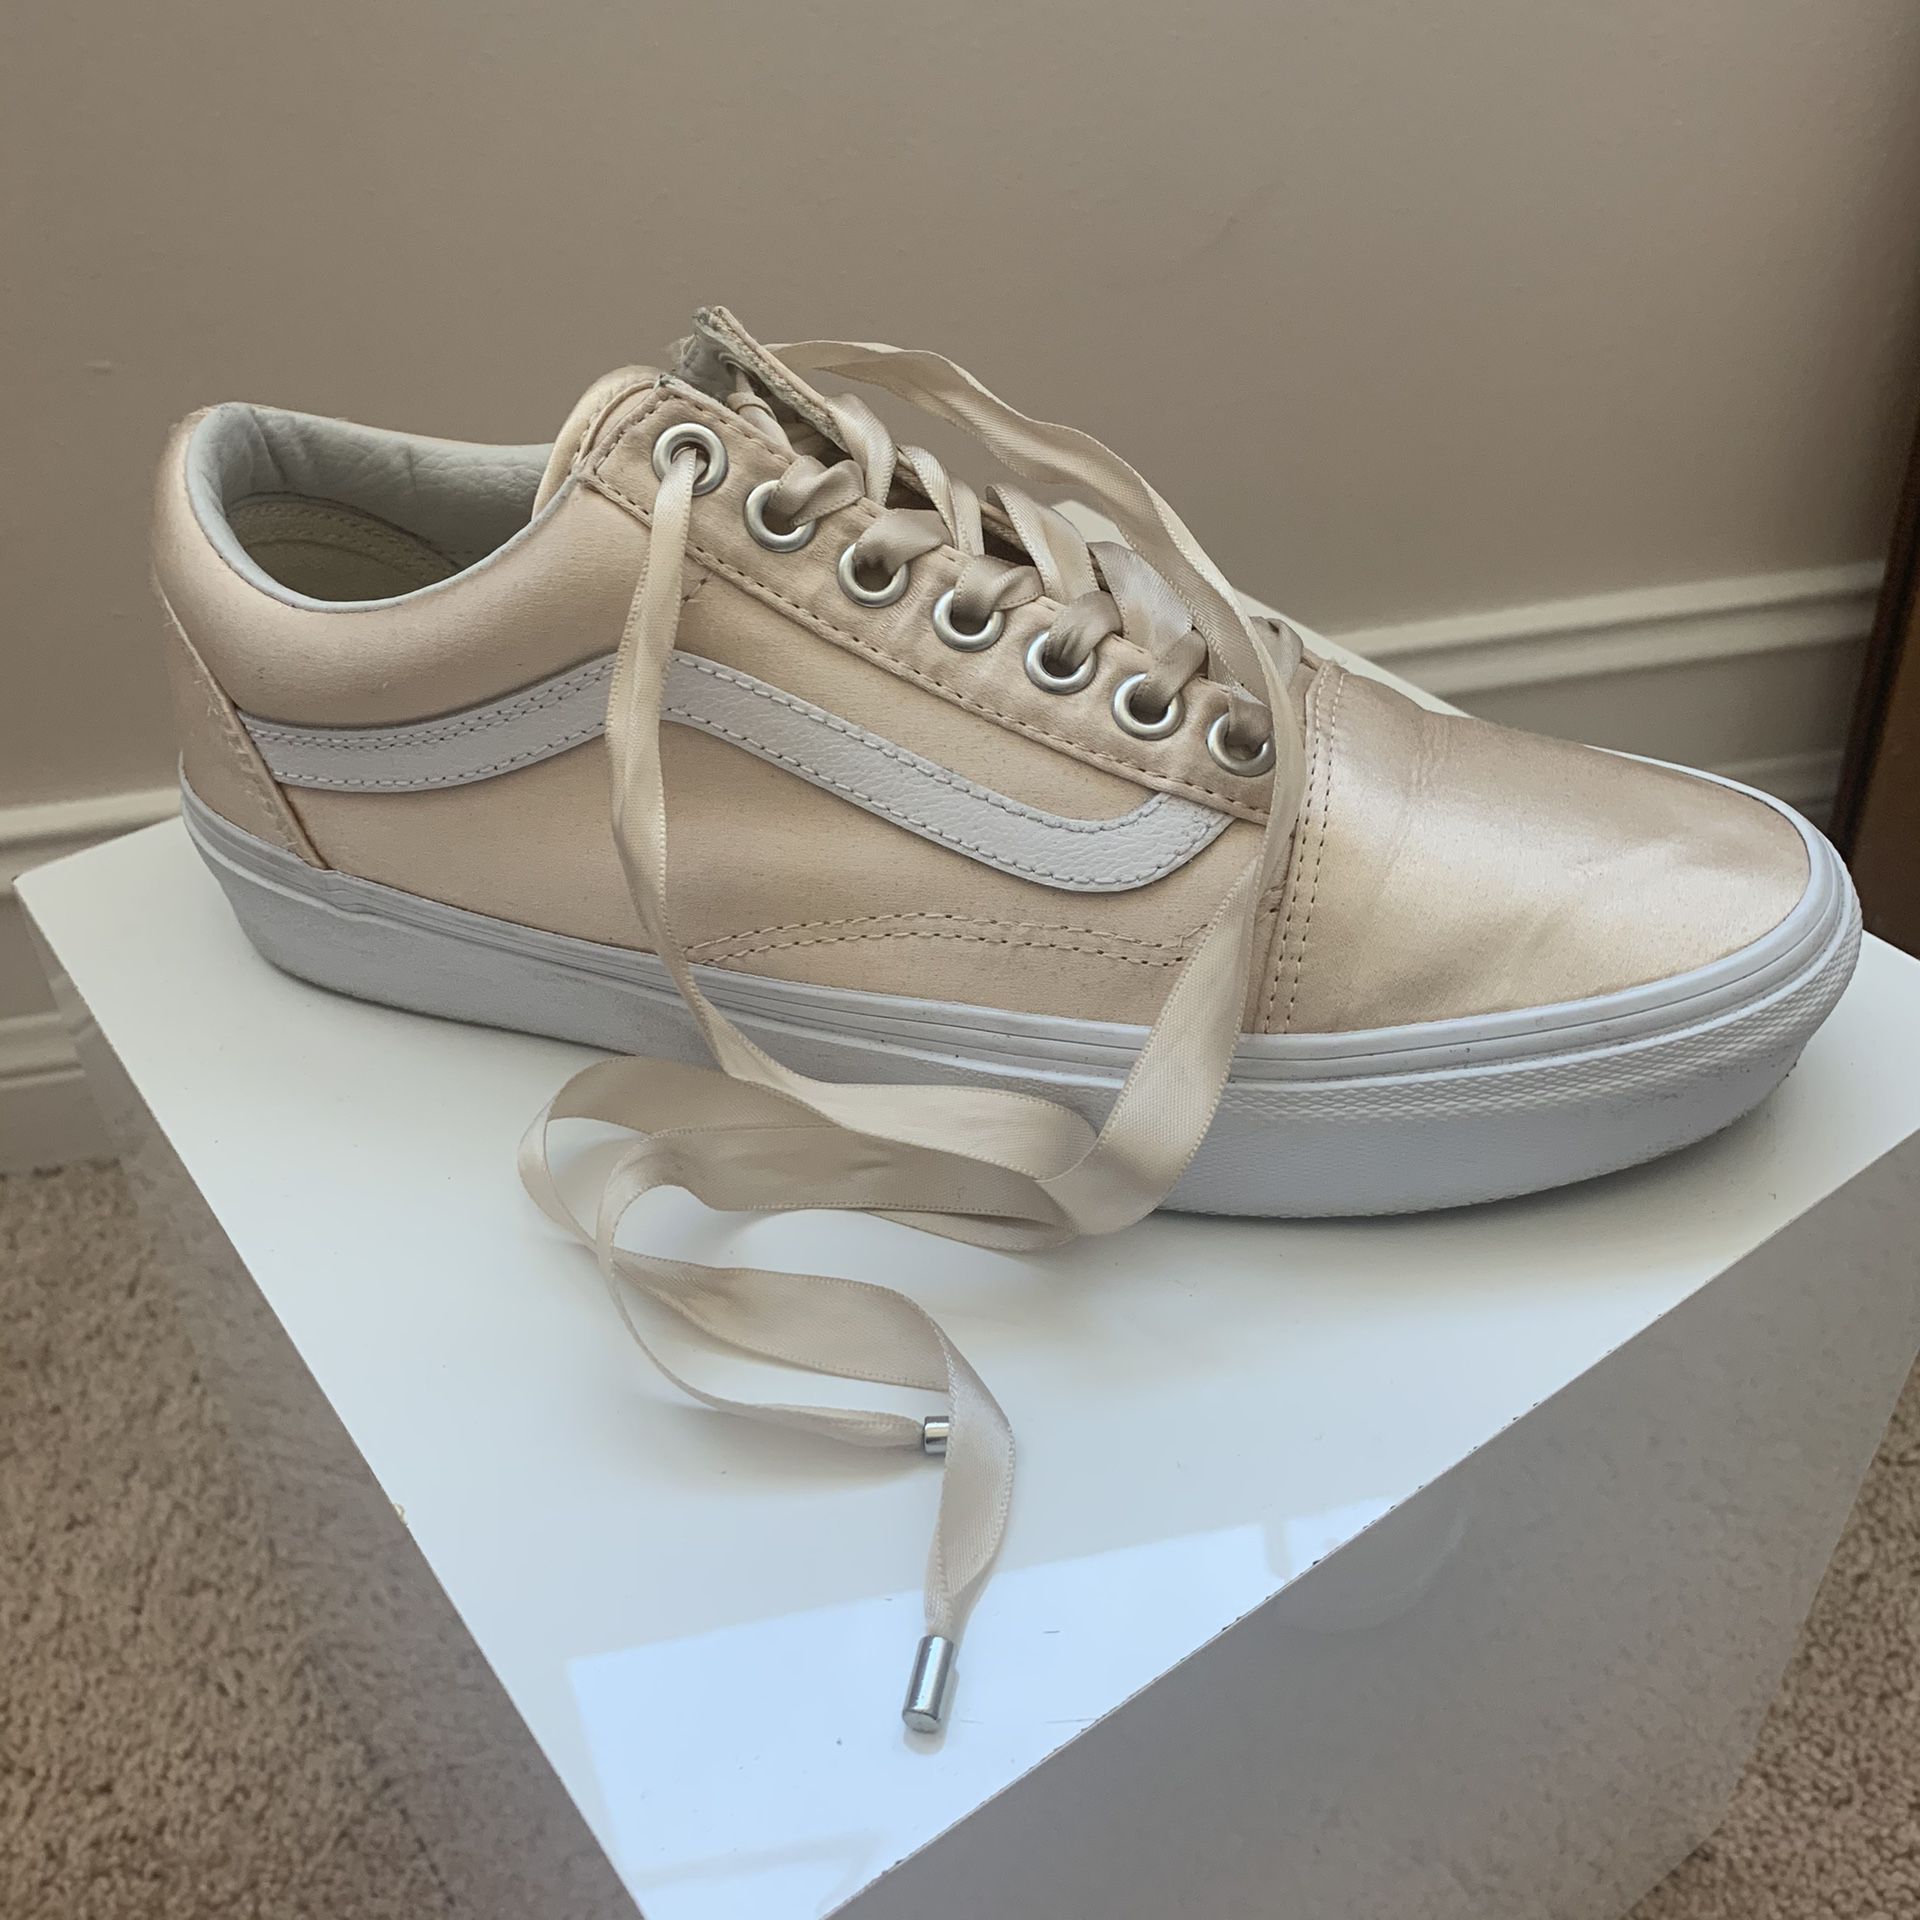 Vans and Nike - size 9.5